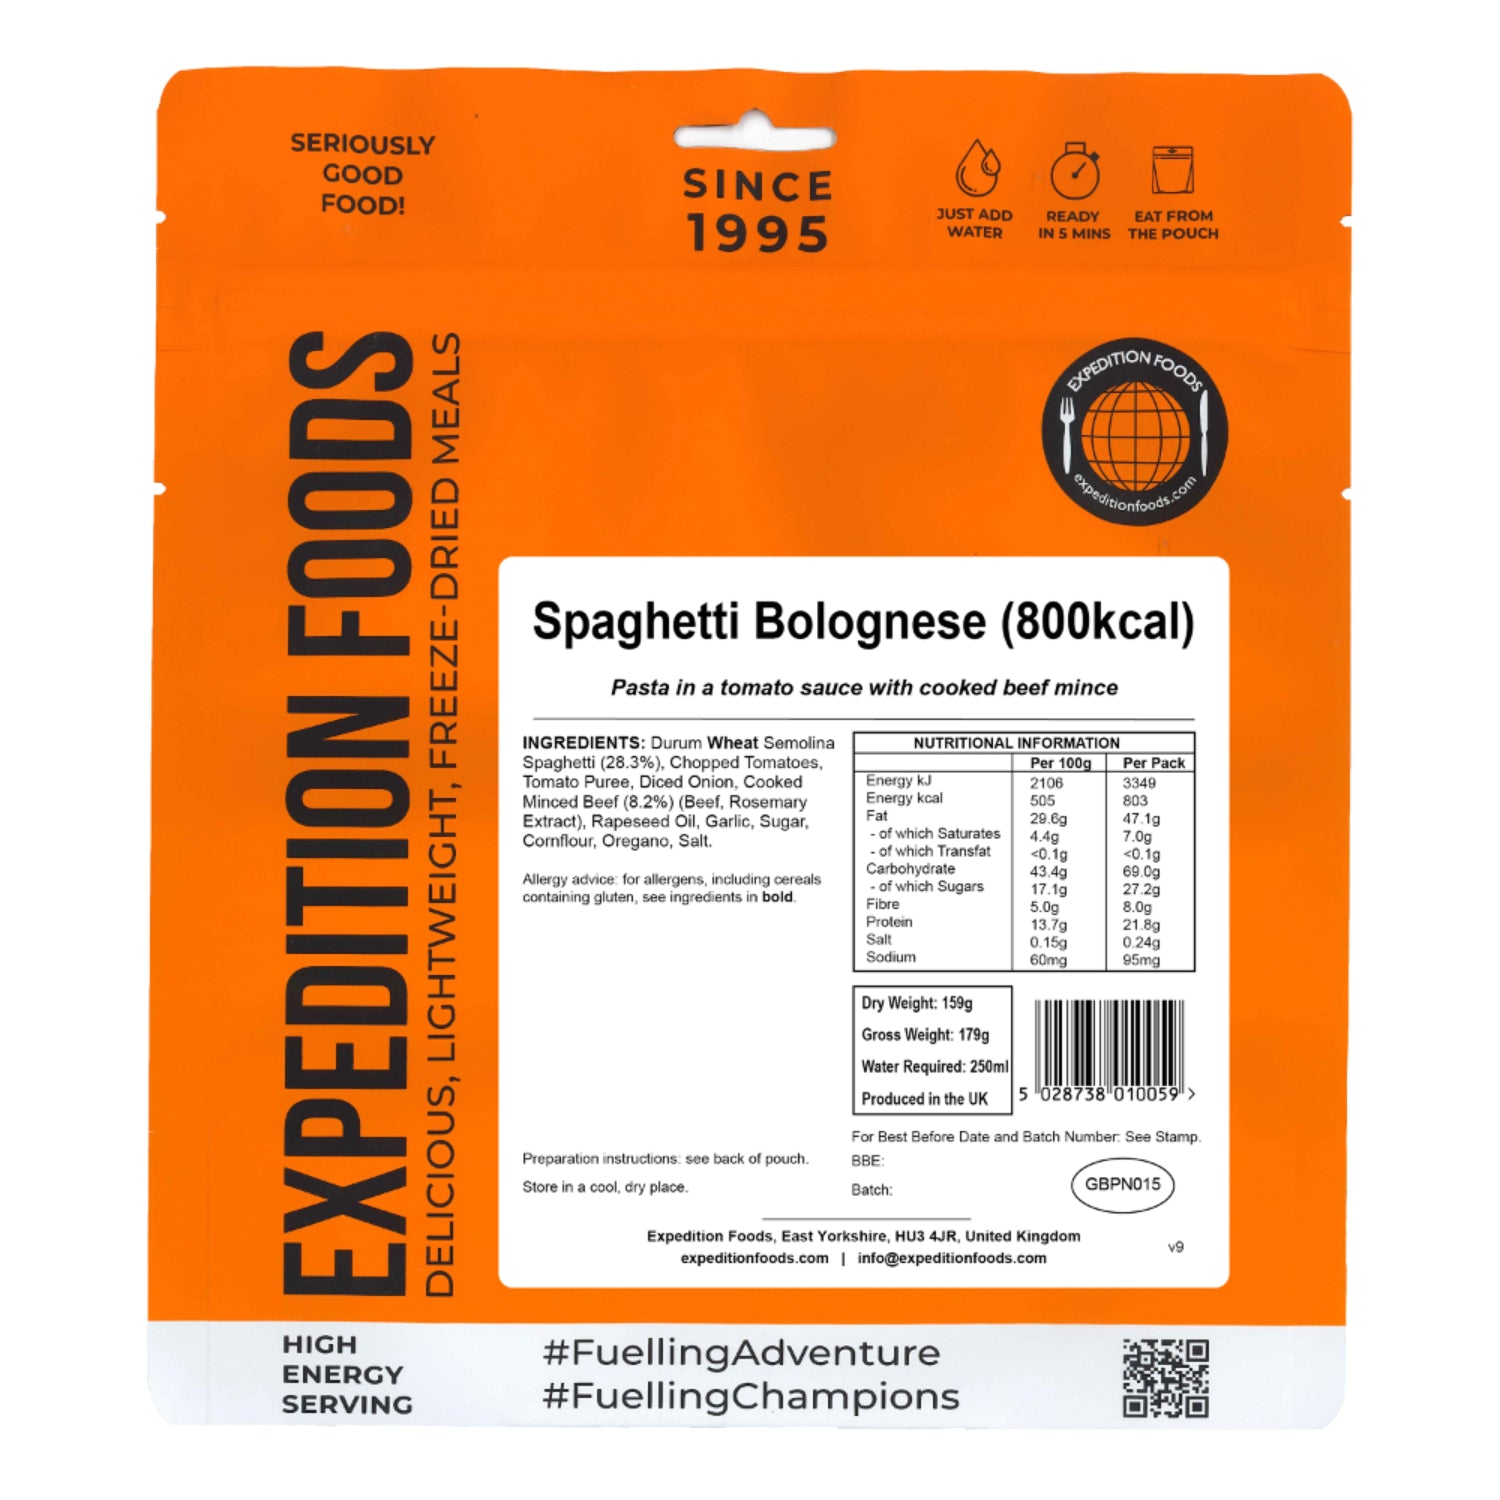 Expedition Foods Spaghetti Bolognese (800kcal), dried camping food pack